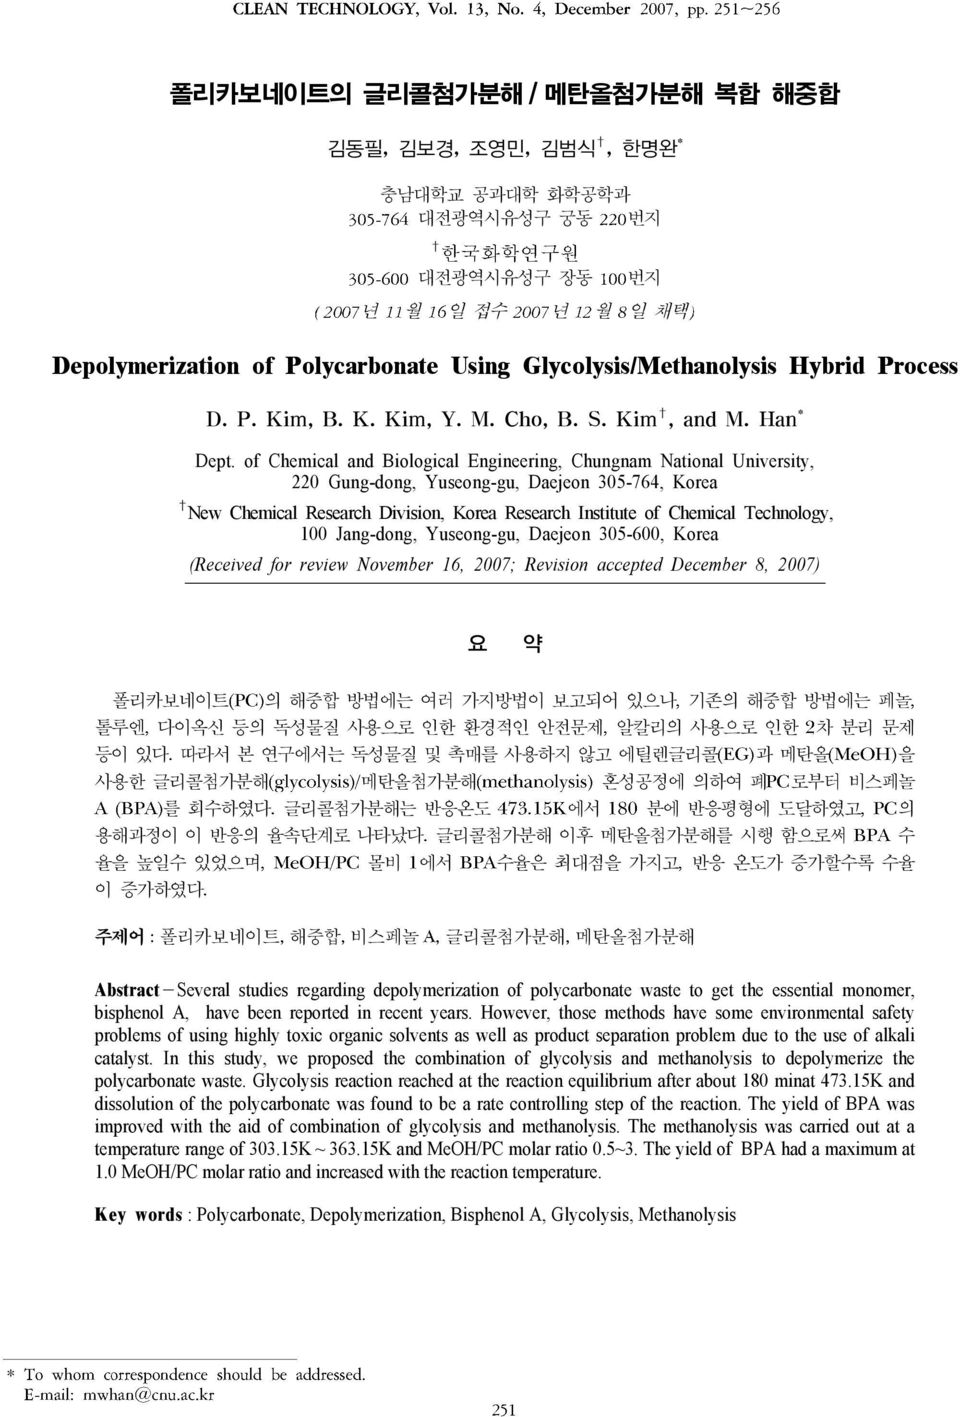 of Chemical and Biological Engineering, Chungnam National University, 220 Gung-dong, Yuseong-gu, Daejeon 305-764, Korea New Chemical Research Division, Korea Research Institute of Chemical